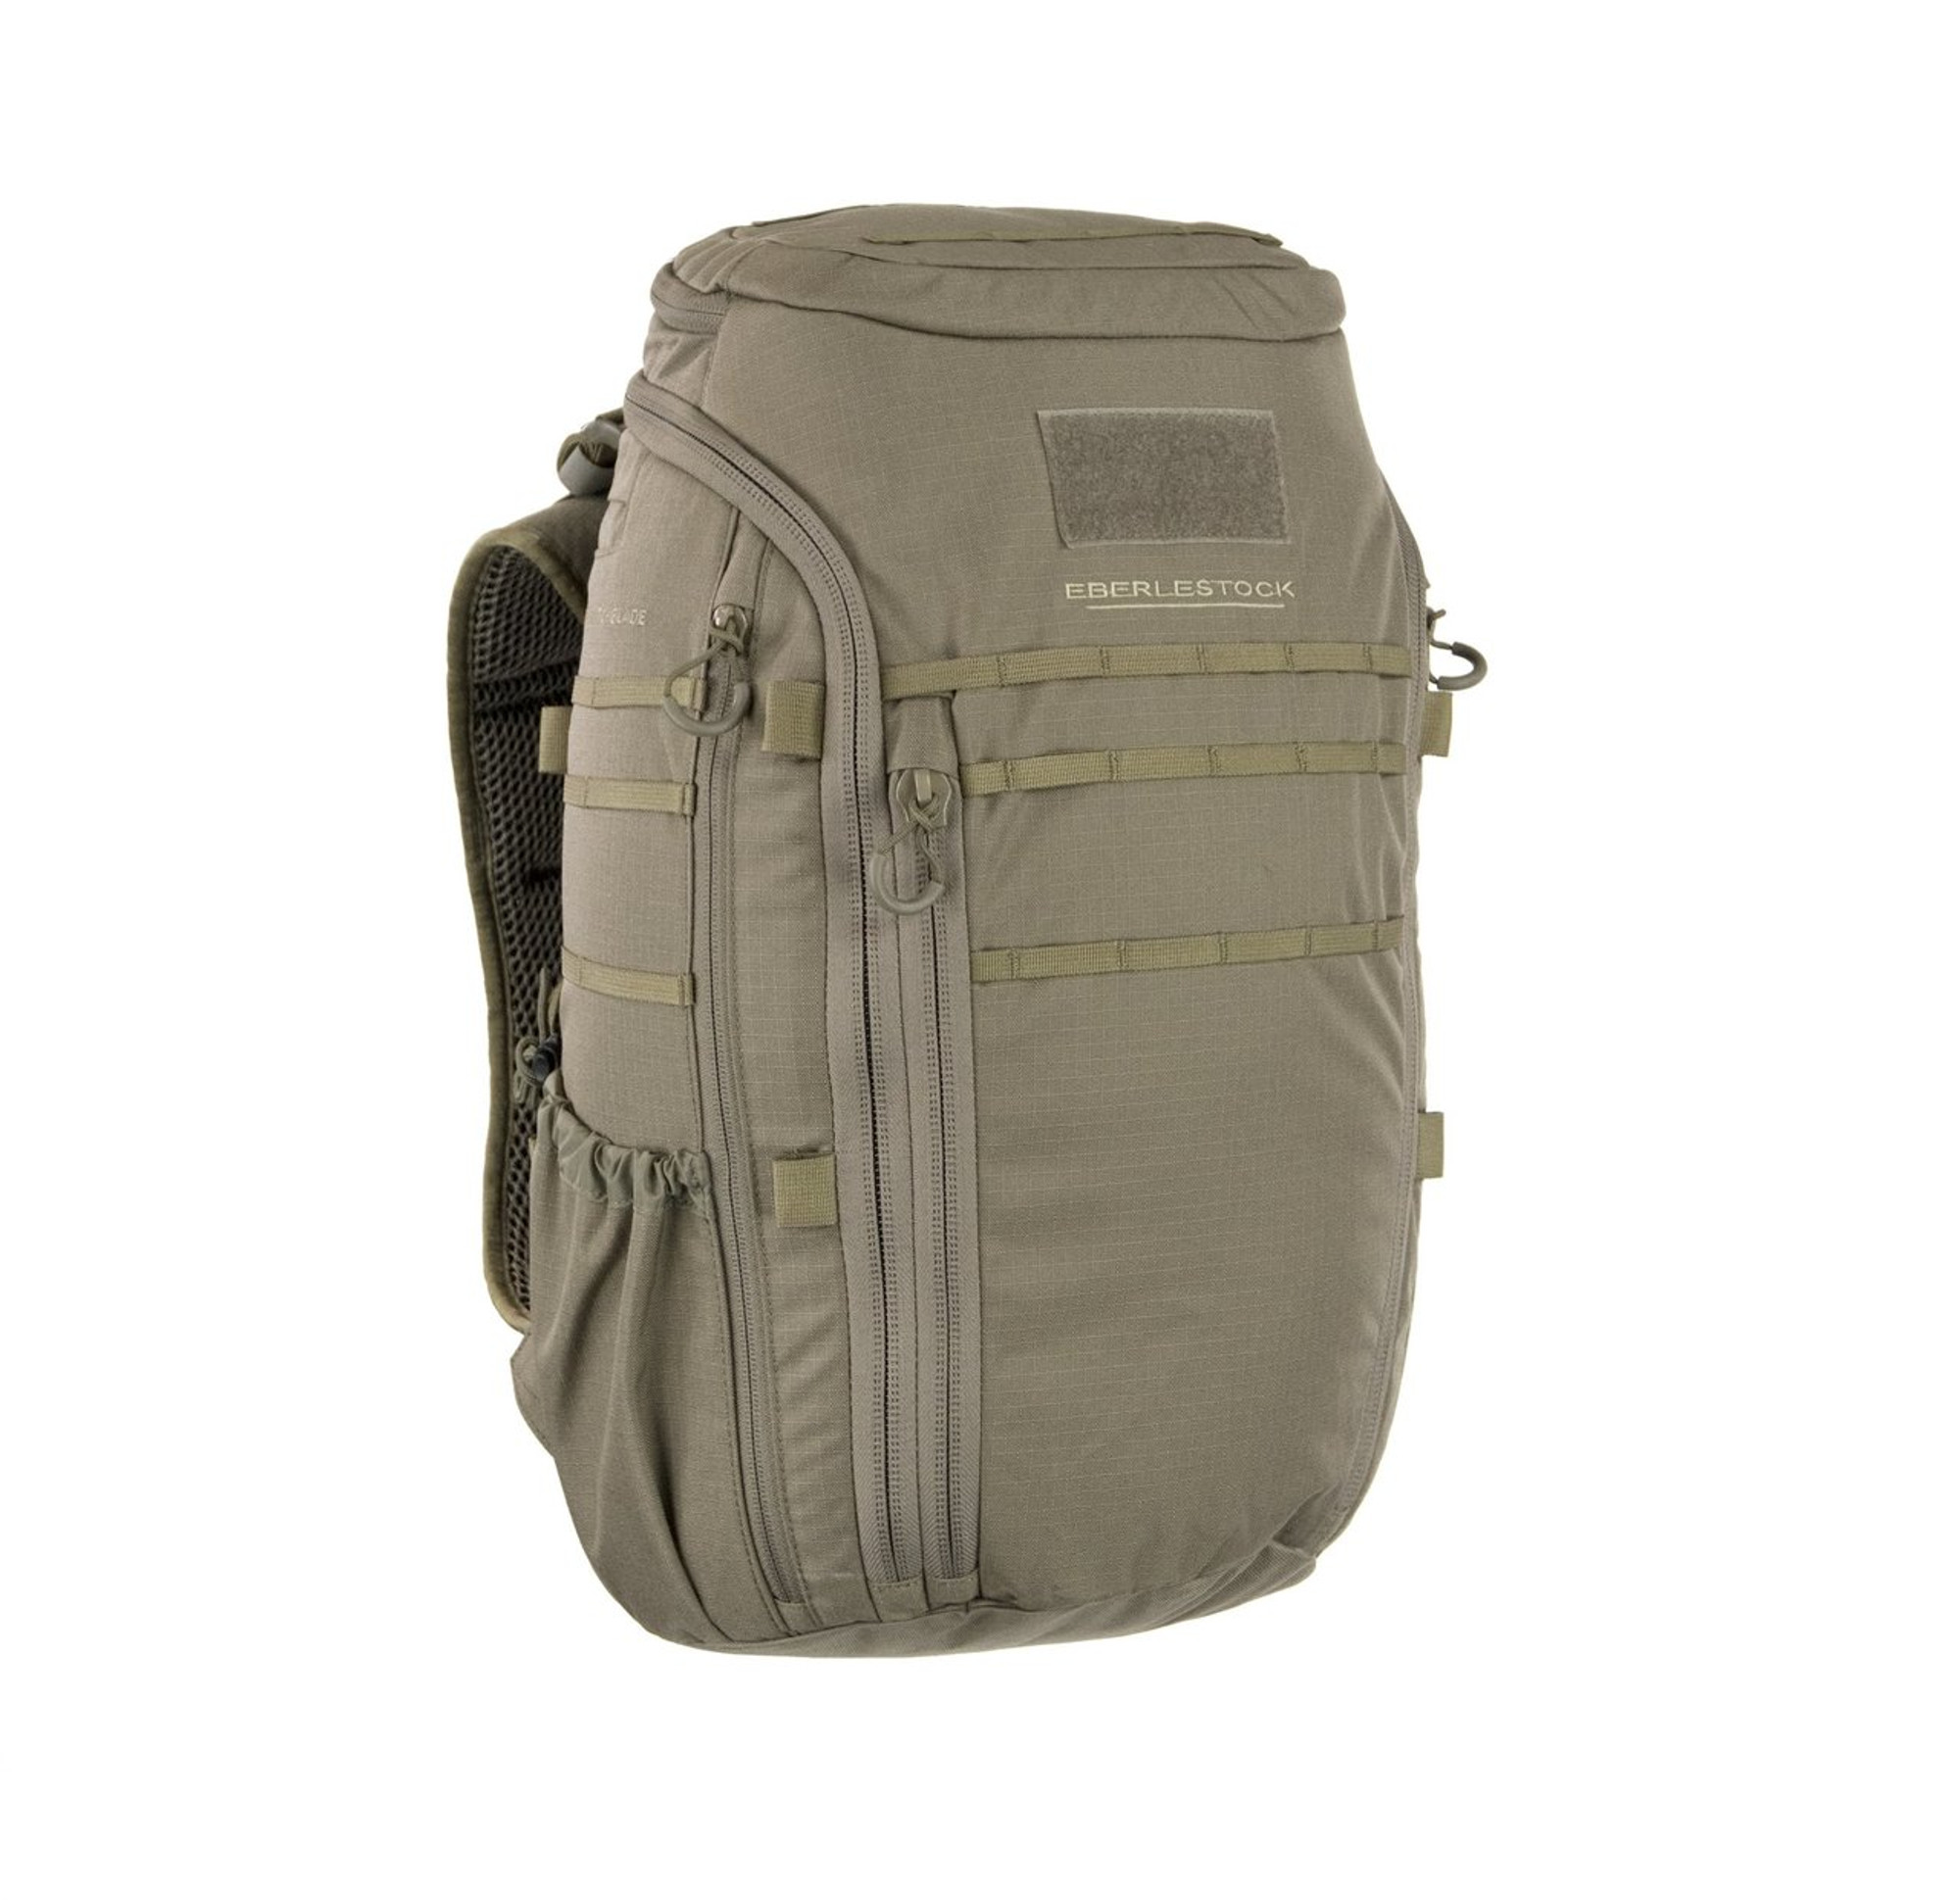 EGO Tactical Dry Gear Bags